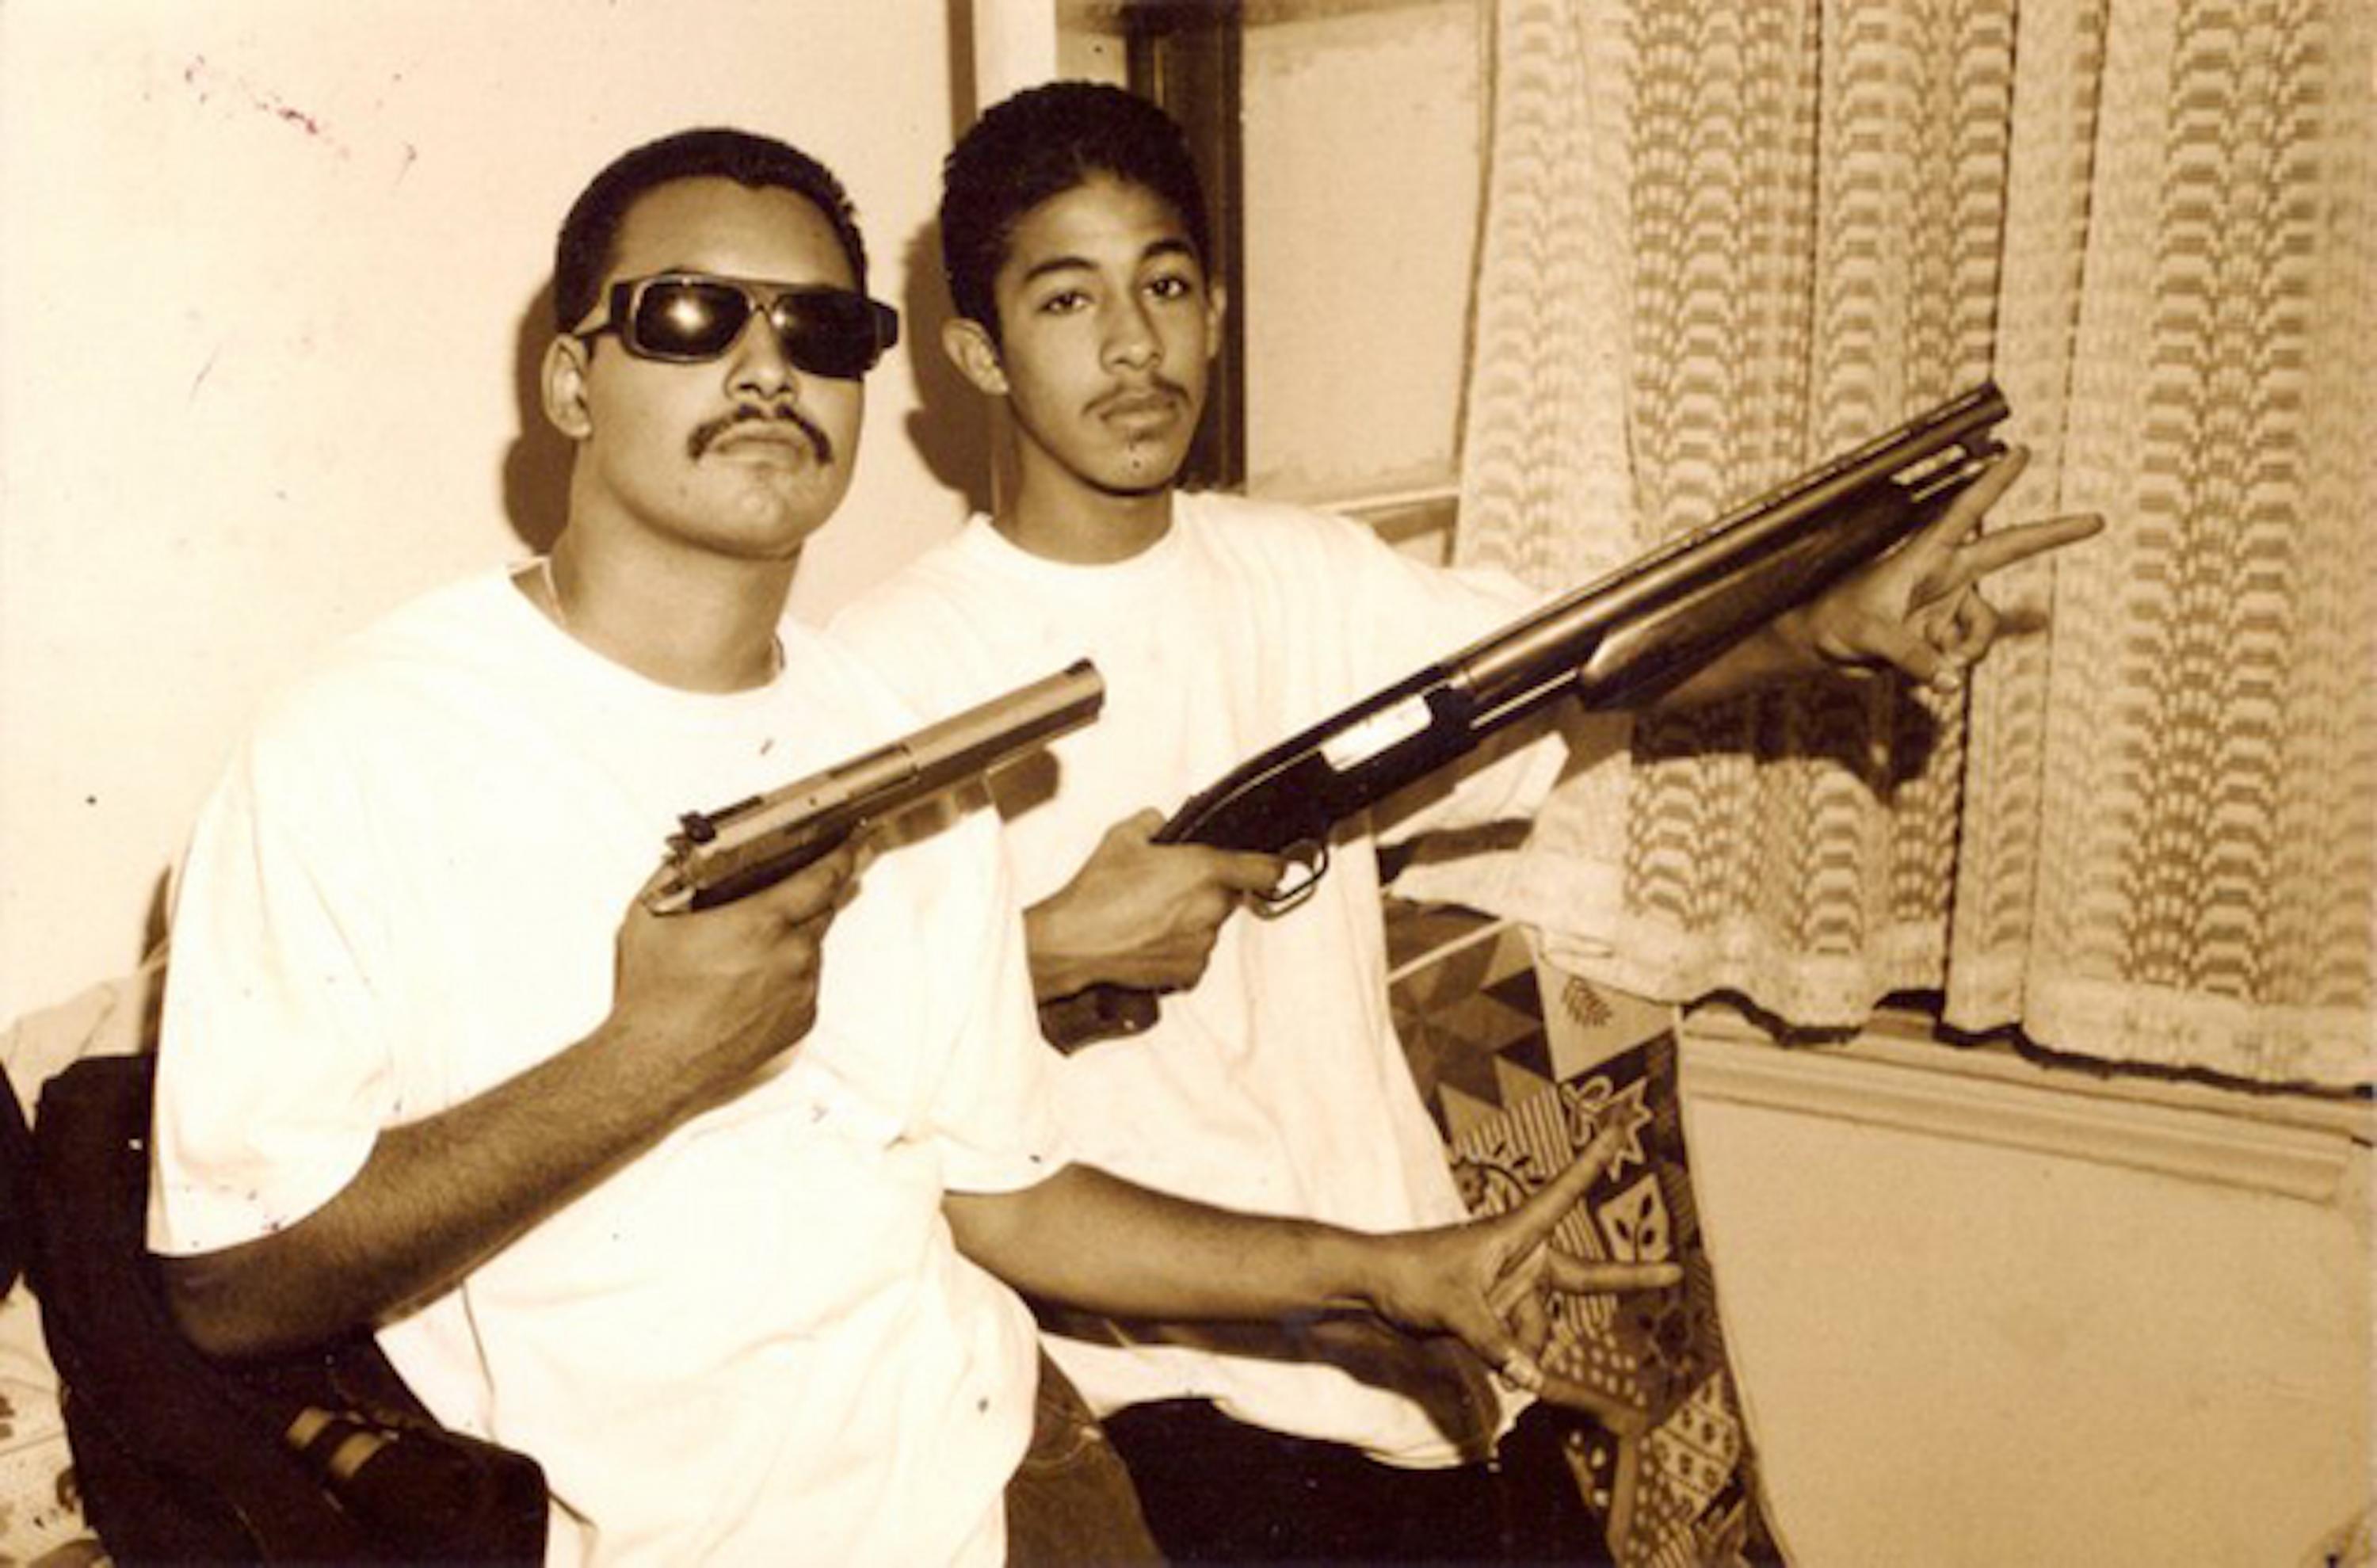 Frosty and Silent, members of the Playboys of Los Angeles gang, flashing their firearms for a photo taken sometime between 1993 and 1995. Photo El Faro archive